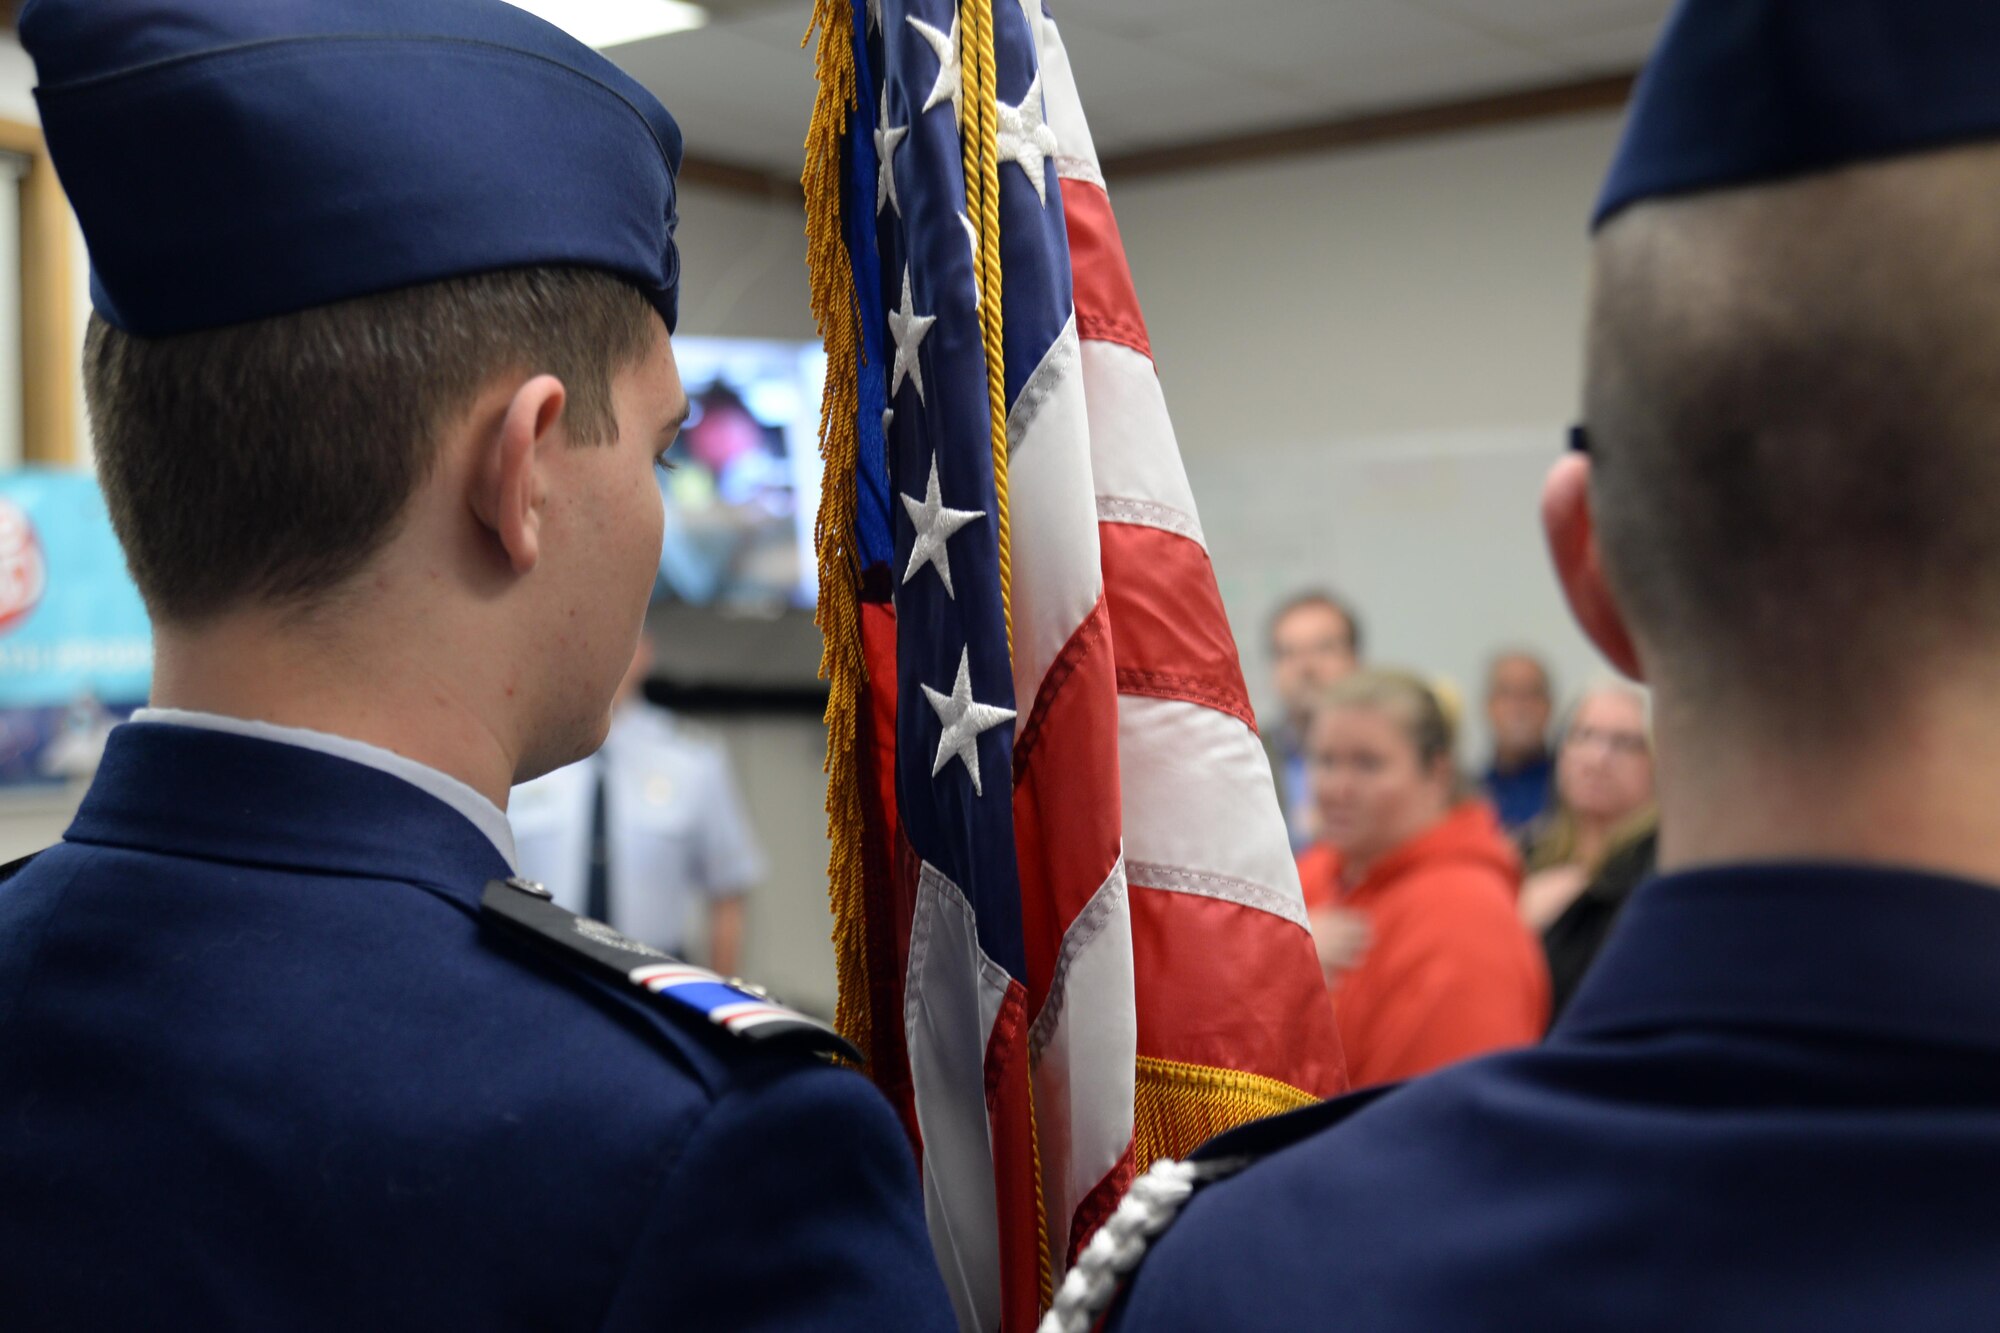 Cadet 2nd Lt. James Crayton (left) and Cadet Chief Master Sgt. Any Robichaux (right) present the colors at the Curtis E. LeMay Composite Squadron's open house March 30 at their squadron headquarters. The event showcased a new state-of-the-art cybersecurity and science, technology, engineering and mathematics (STEM) learning environment made possible by grants from a local corporate sponsor, the Offutt Officers’ Spouses’ Club and an anonymous donor. 

About 56,000 members make up CAP, which celebrated 75 years of service on Dec. 1, 2016, and consists of eight geographical regions, composed of 52 separate wings, one in each state, and Washington D.C. and Puerto Rico. The organization operates a fleet of 550 aircraft and performs about 90 percent of continental U.S. inland search and rescue missions as tasked by the Air Force Rescue Coordination Center. CAP is credited with saving an average of 78 lives every year.